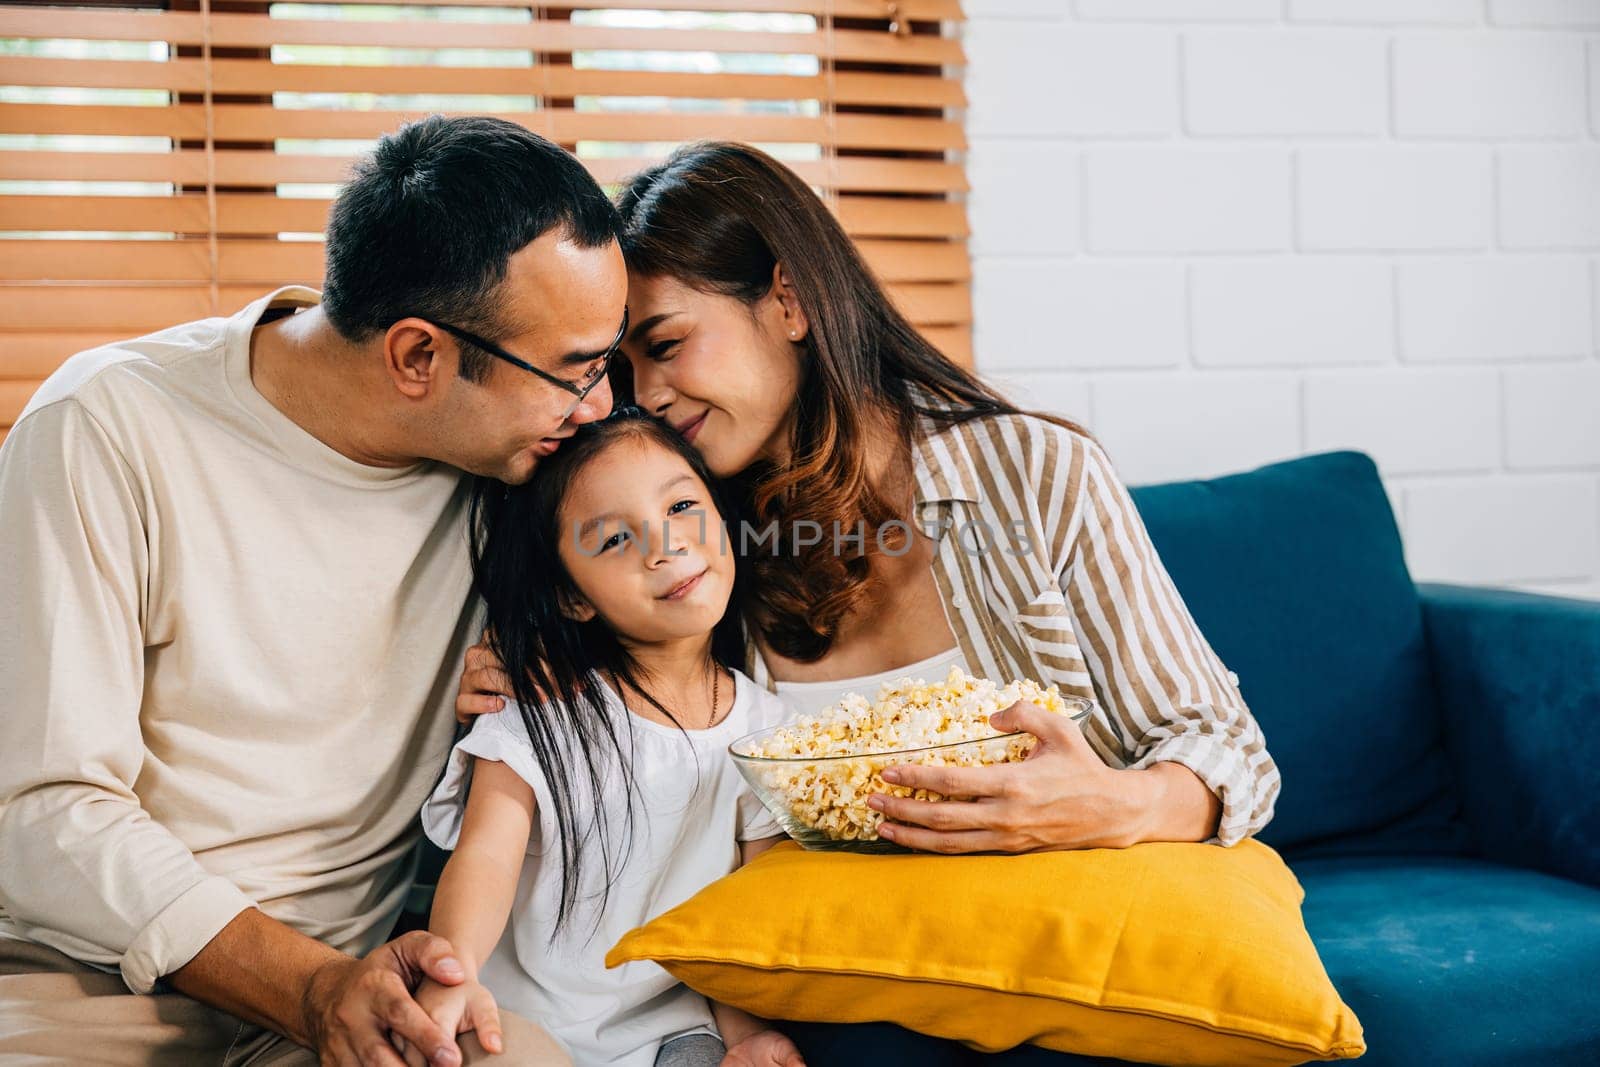 Family bliss is captured as they gather on sofa watching TV and munching popcorn. father mother daughter and sibling share laughter embodying happiness togetherness and relaxation.